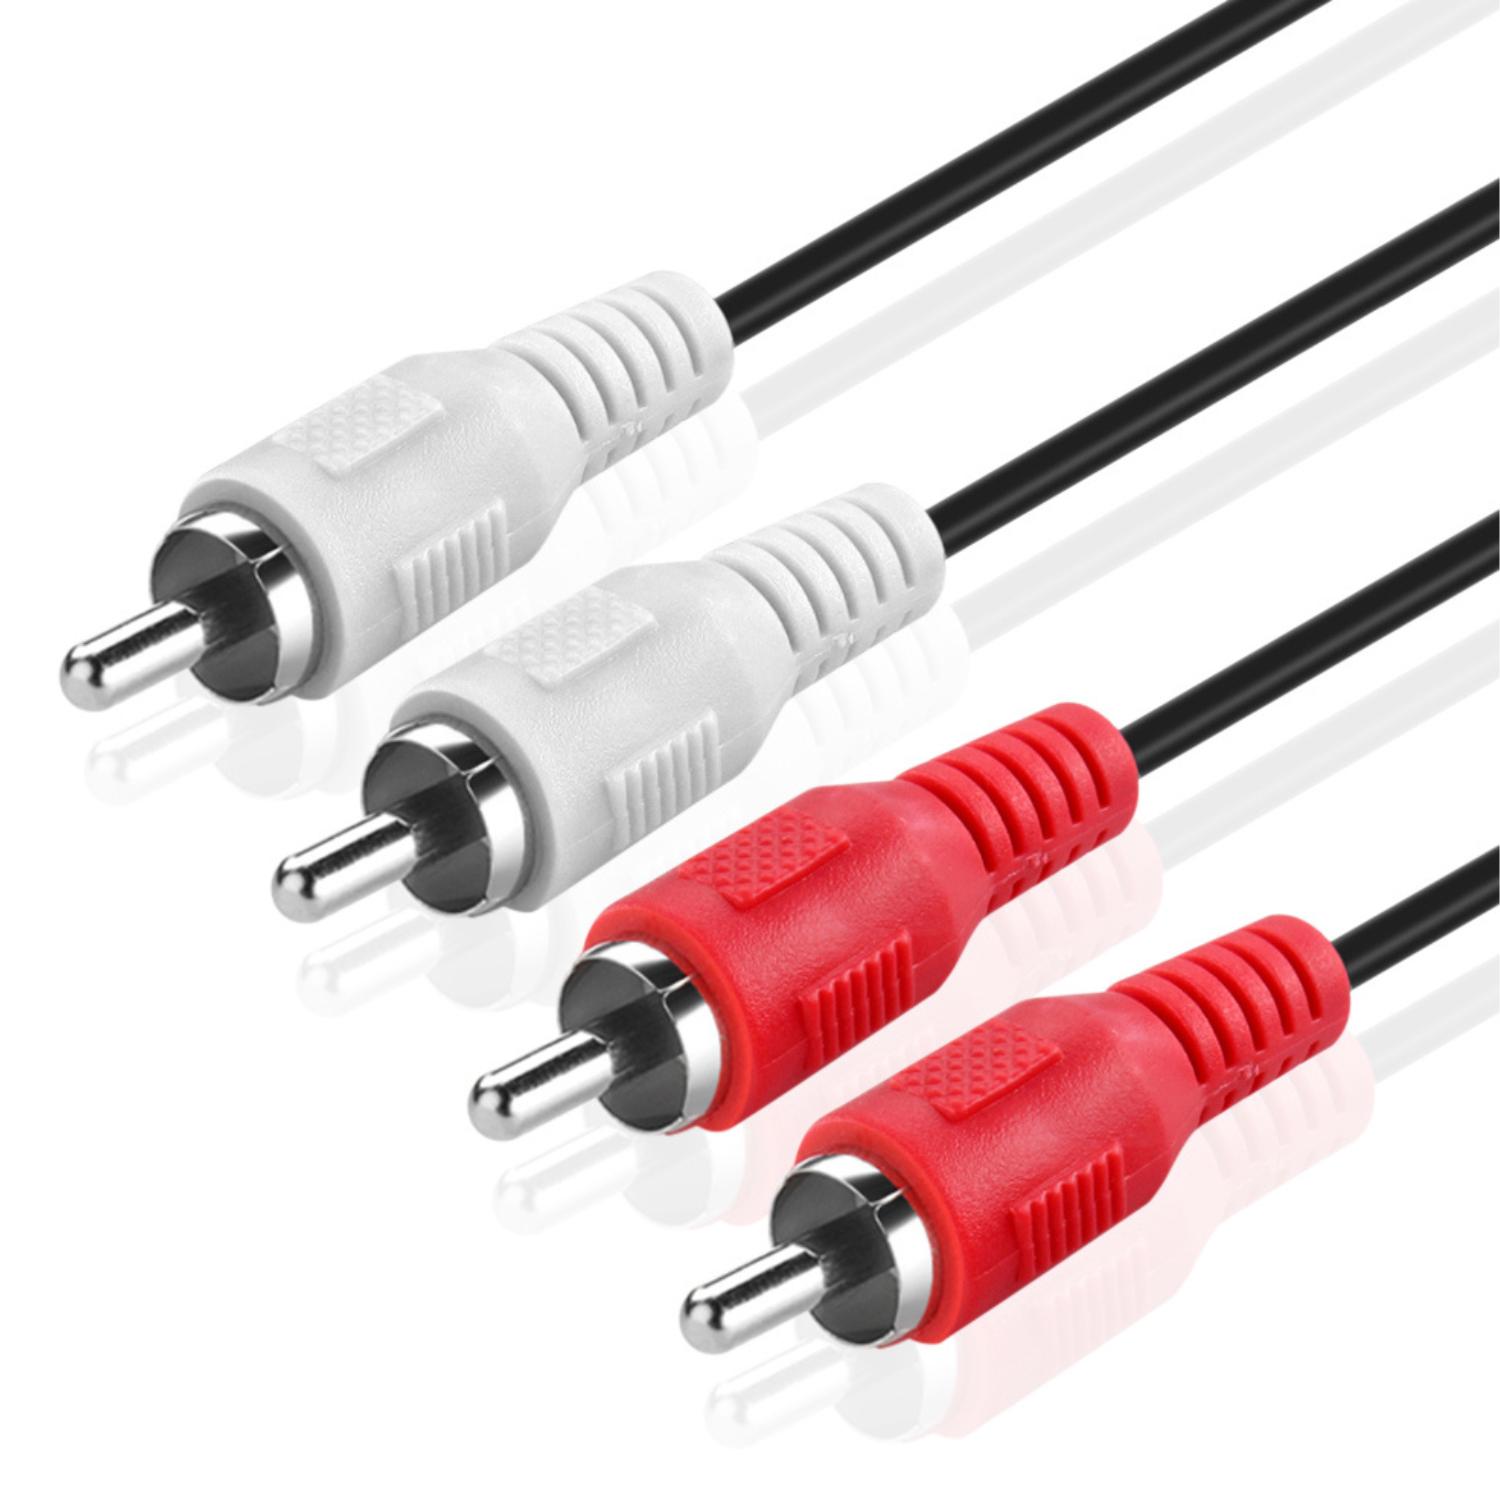 2RCA Stereo Audio Cable (10 Feet) - Dual Composite RCA Male Connector M/M 2 Channel (Right and Left) (Red and White) Shielded 2RCA to 2RCA AV Sound Plug Jack Wire Cord - image 1 of 6